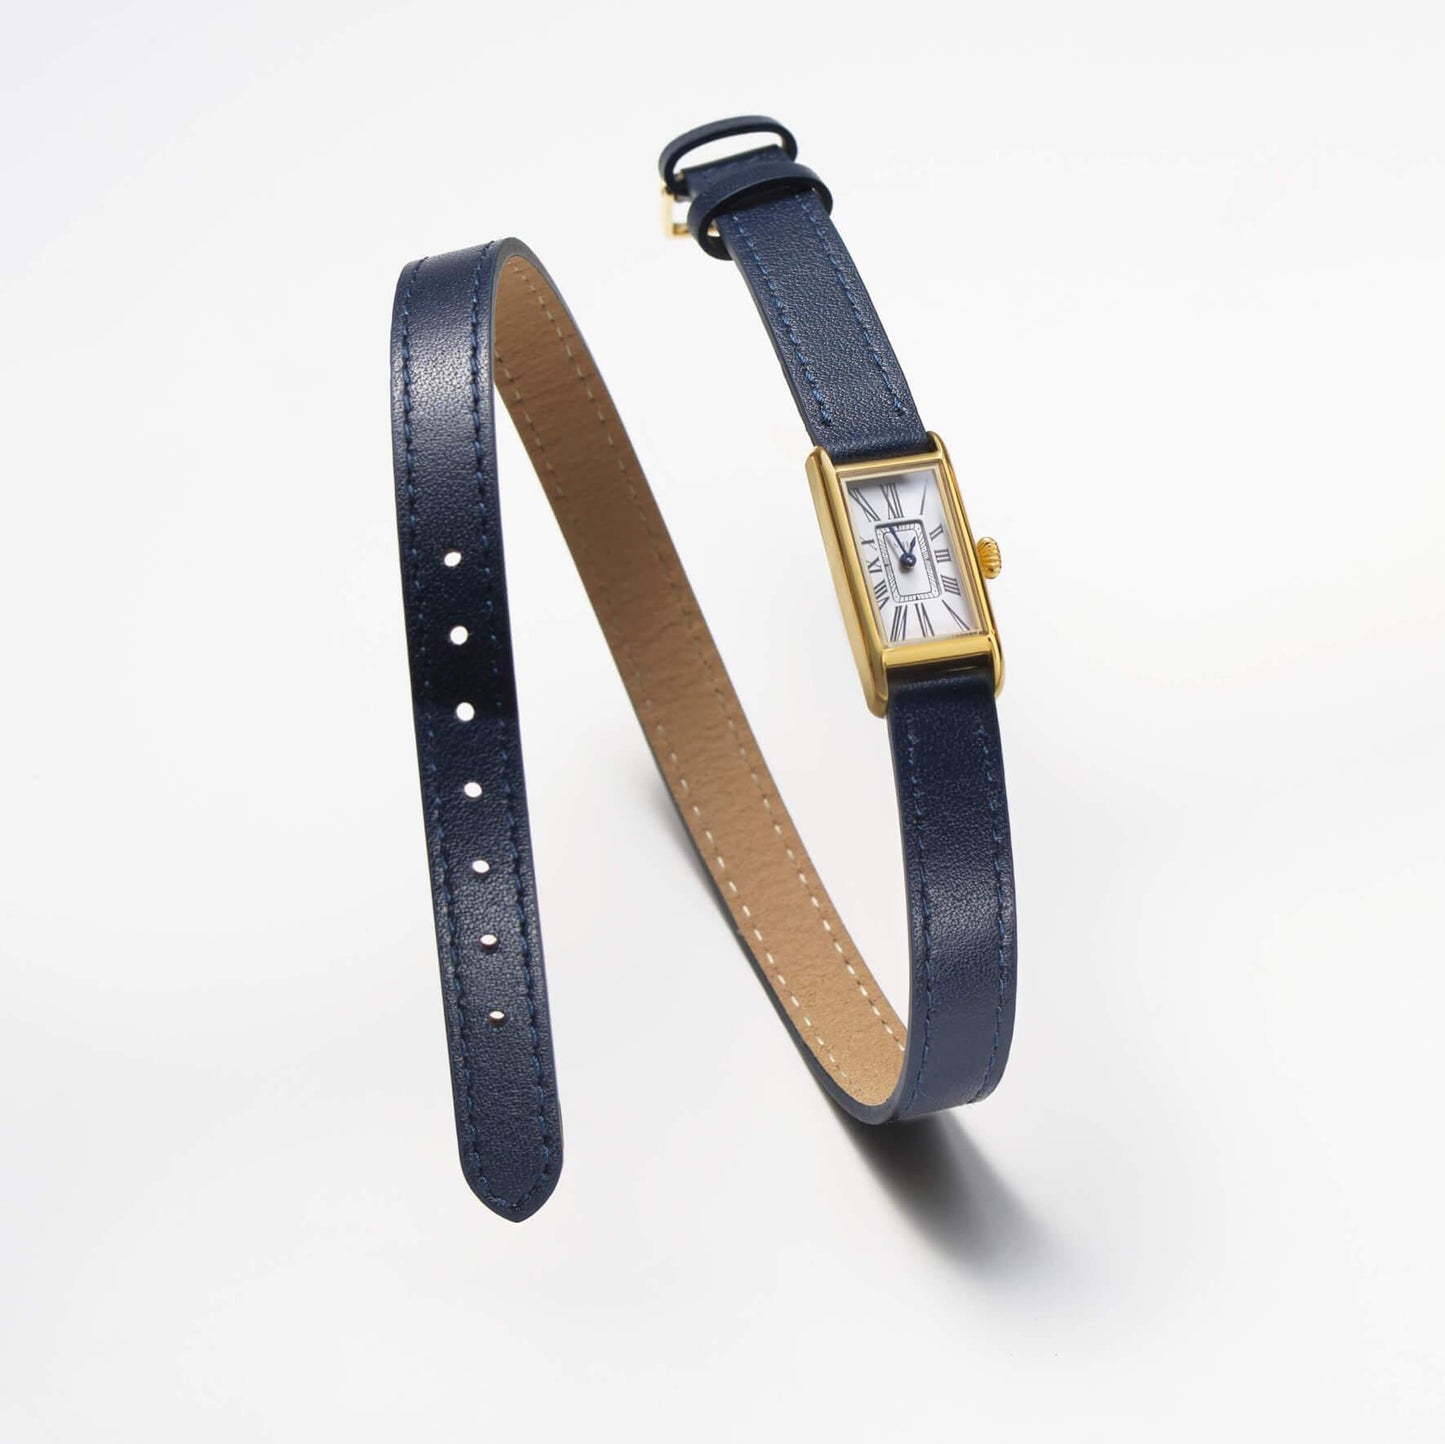 Navy Kimsey Watch in Brown Leather “Double Wrap” Strap and gold hardware